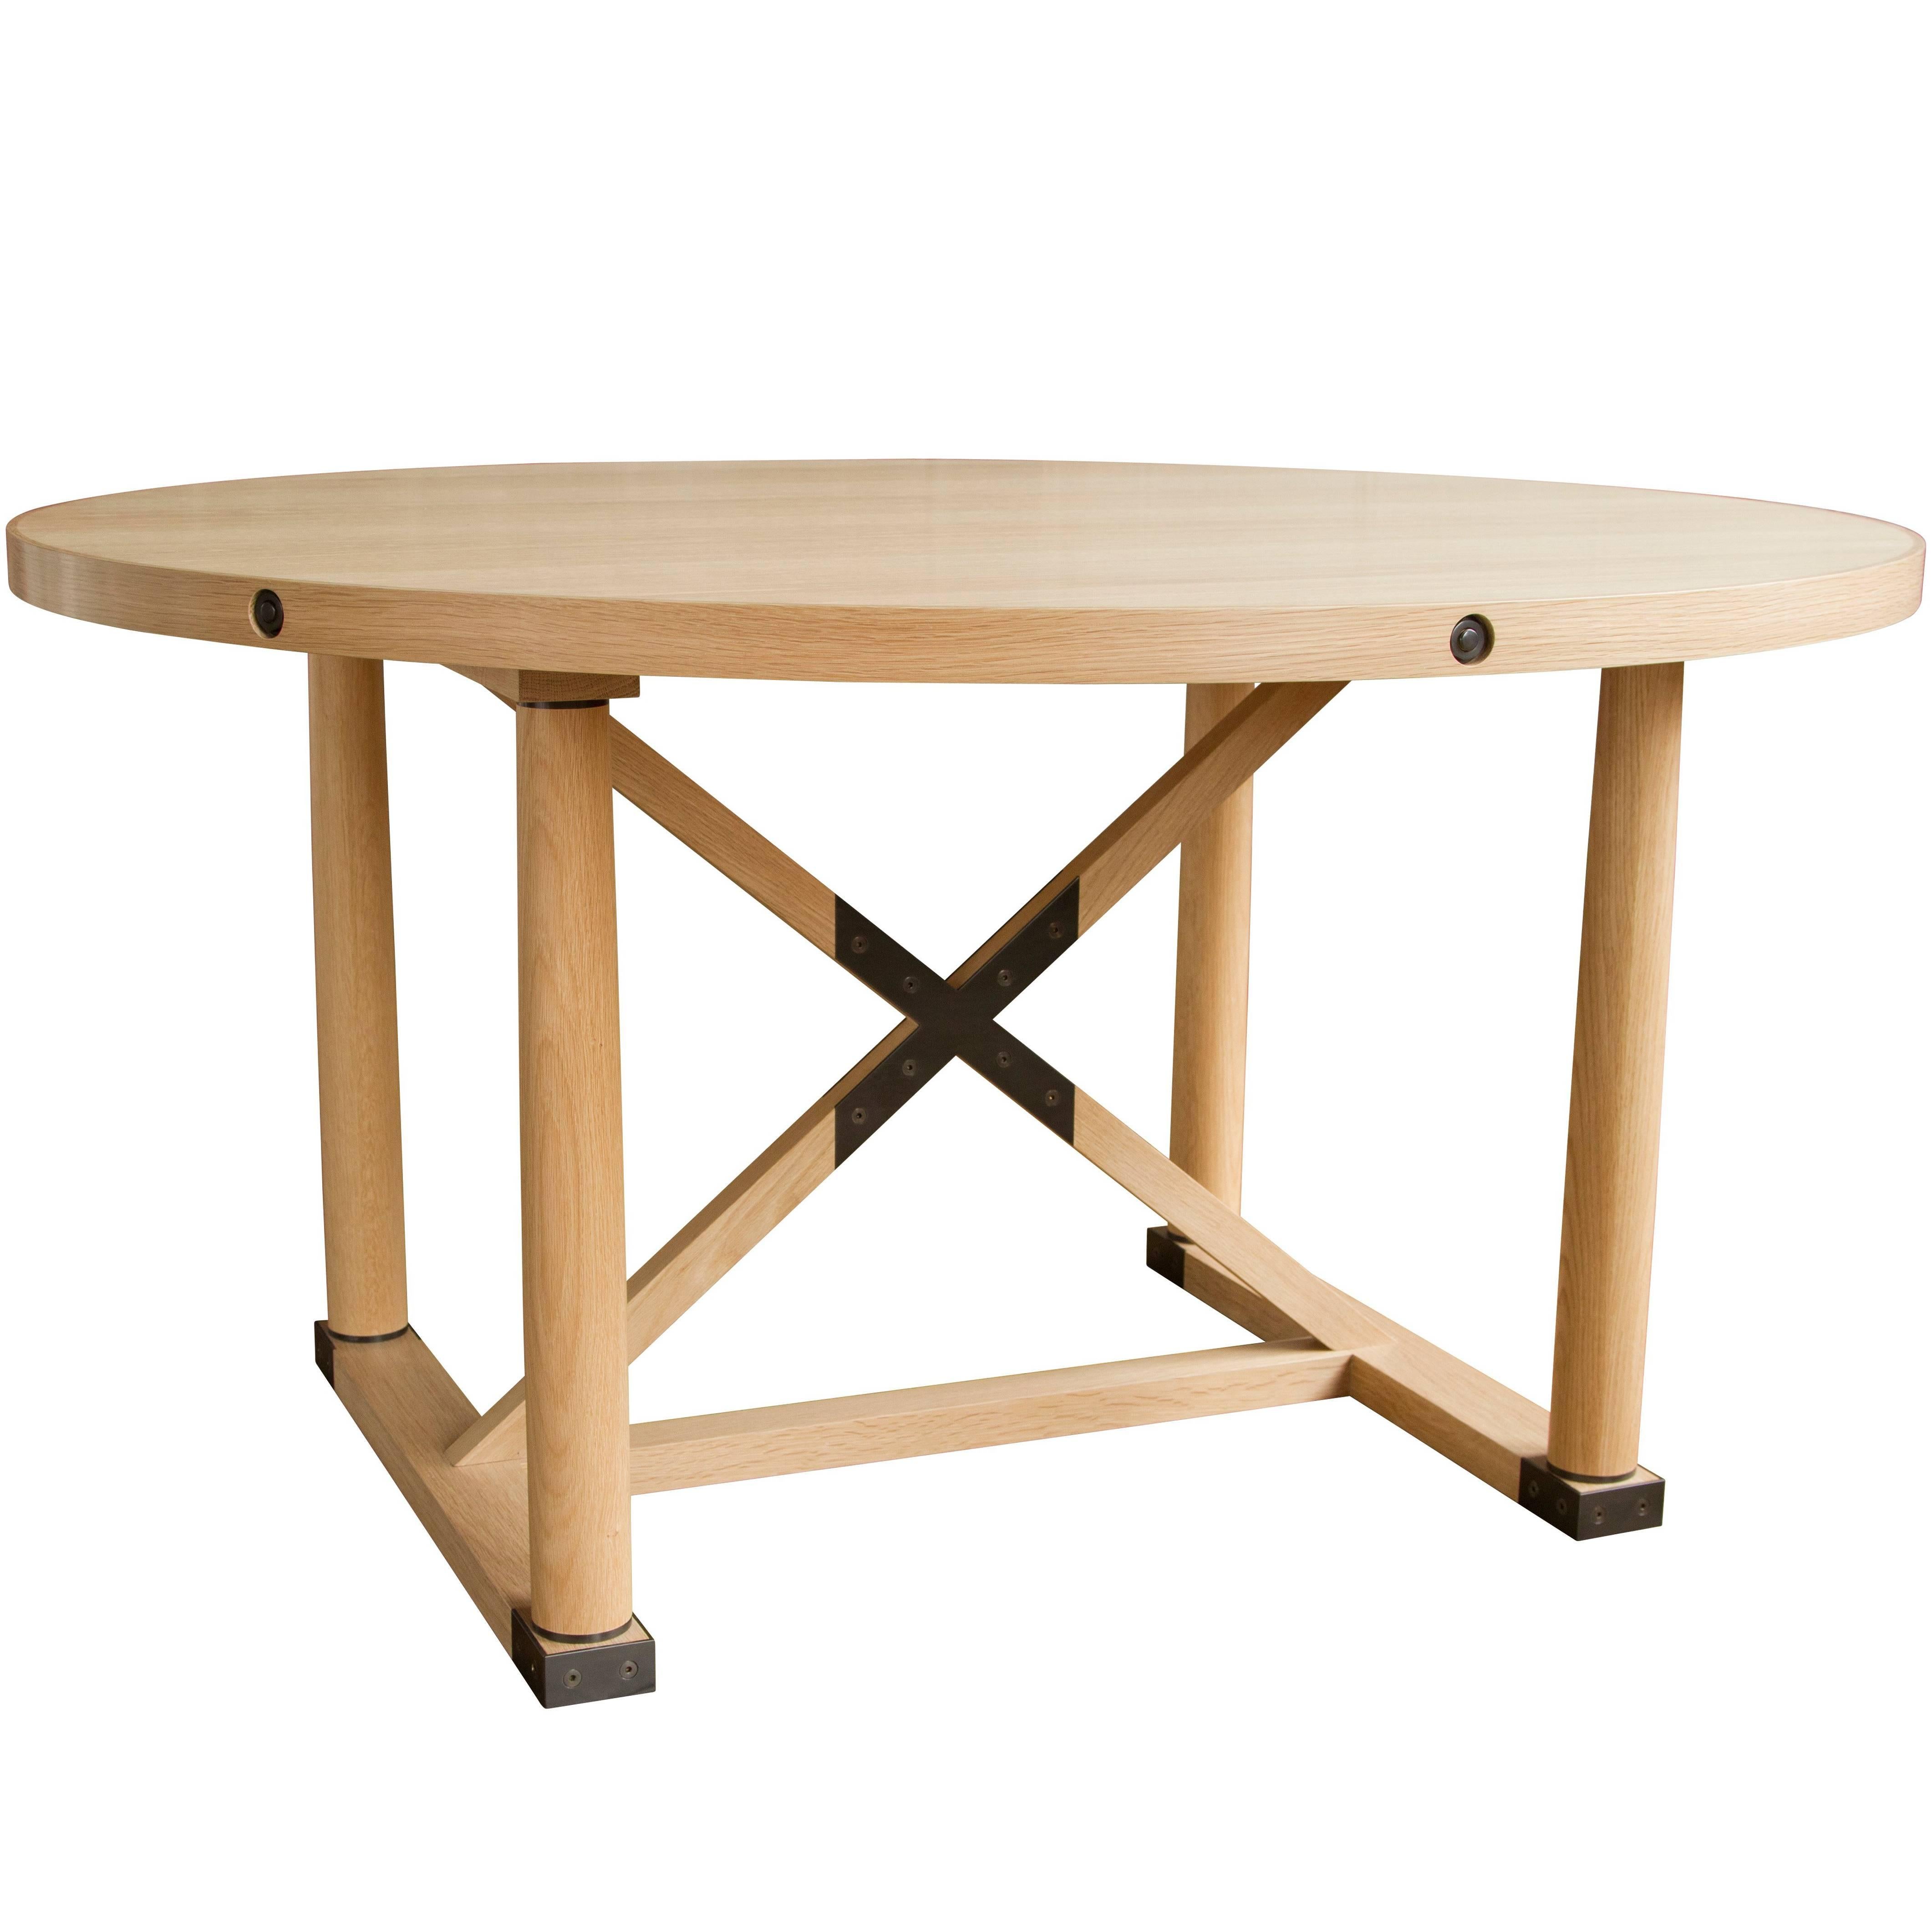 Carden Round Table, White Oak + Brass - handcrafted by Richard Wrightman Design